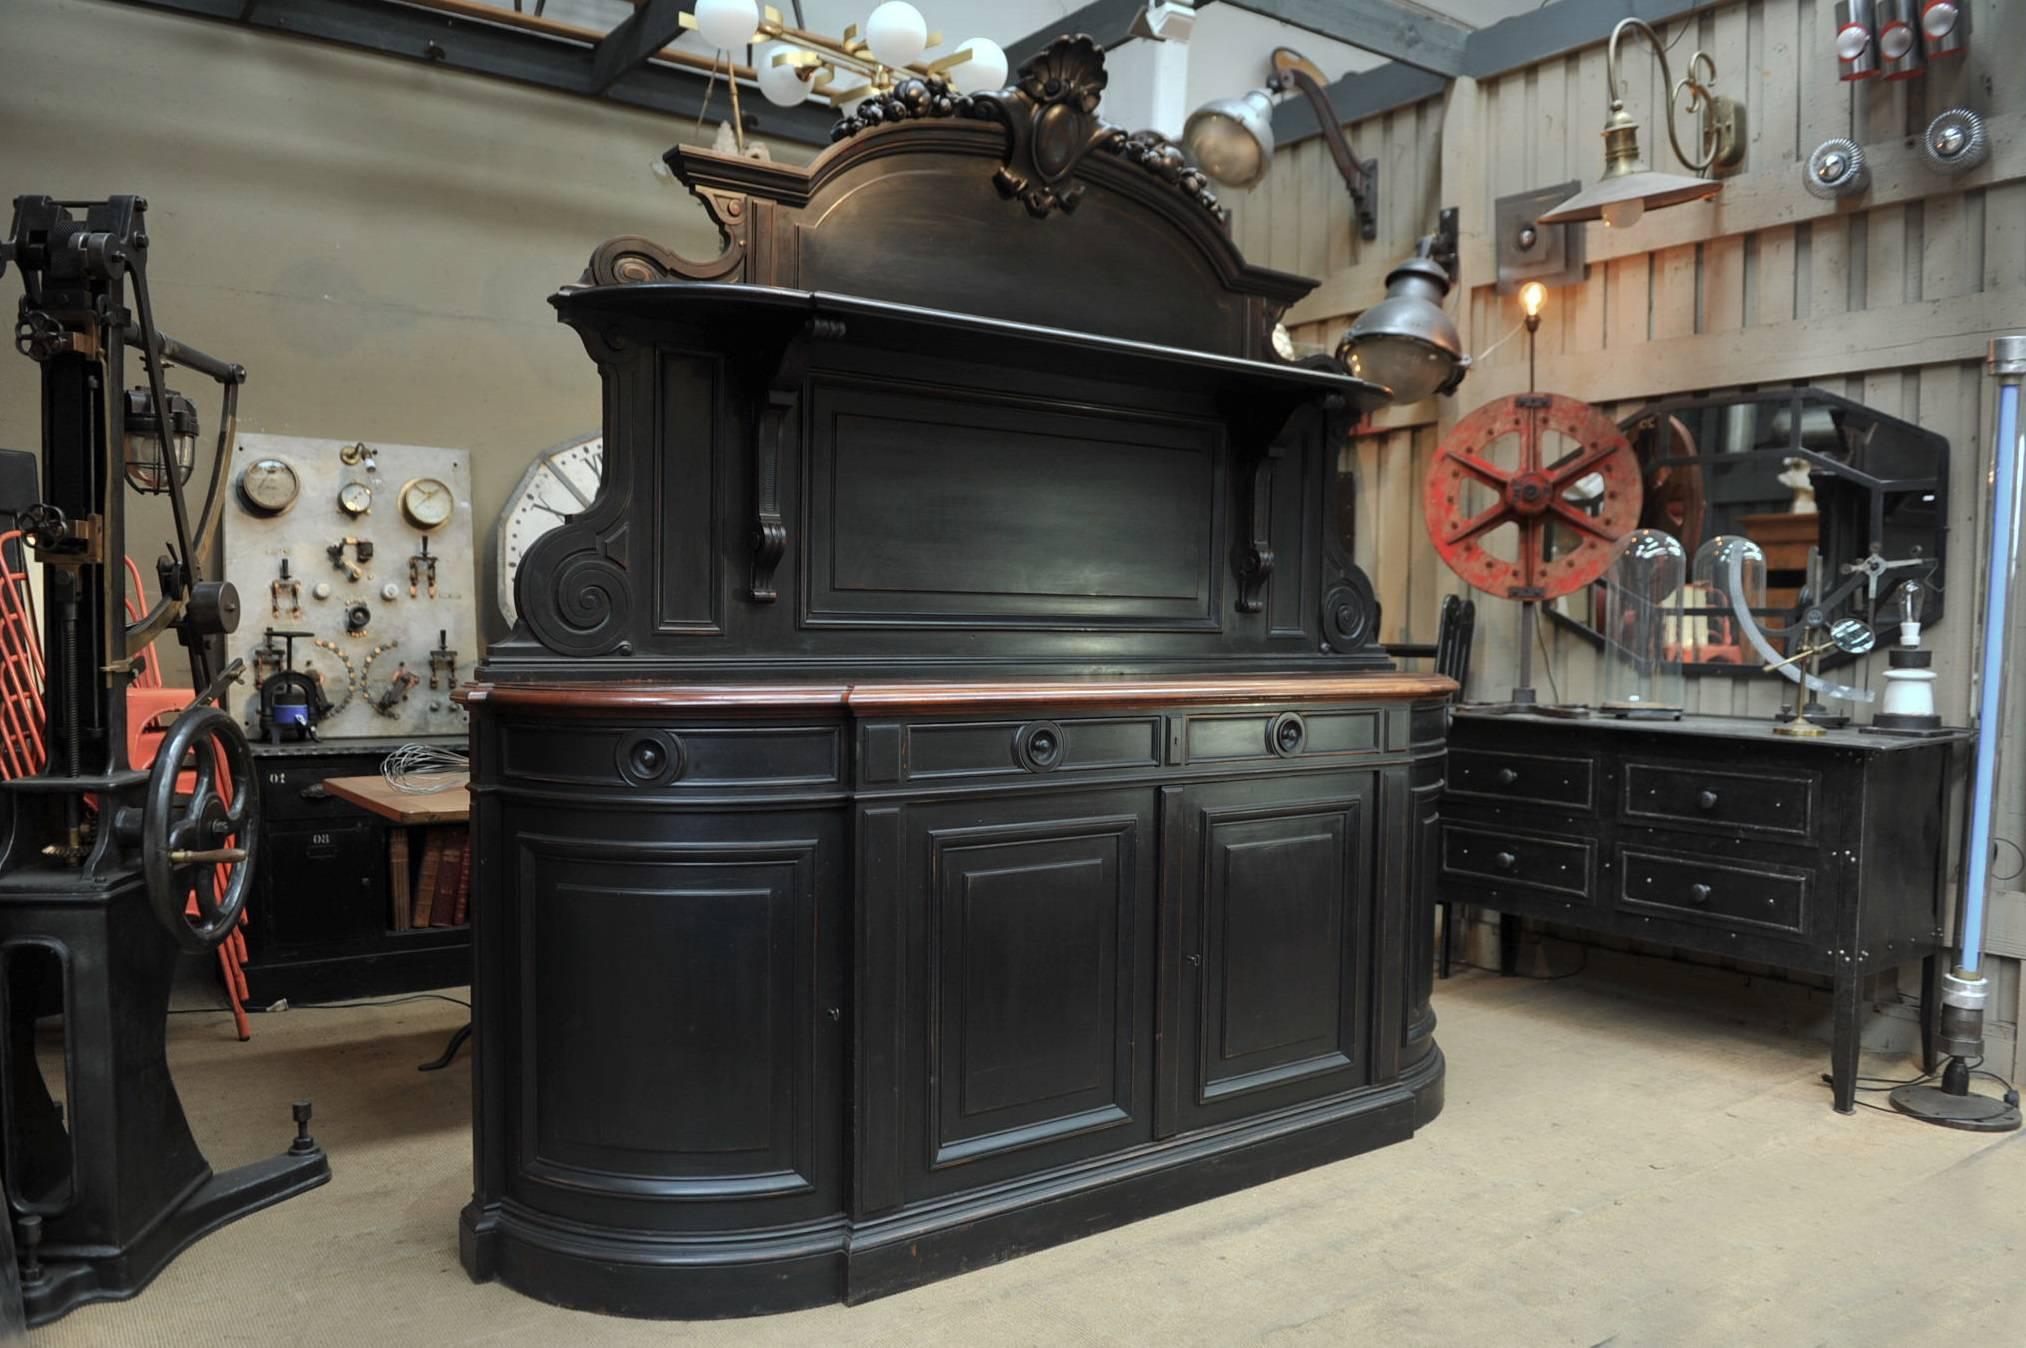 19th century French ebonized mahogany face and oak back Napoleon III Saint Hubert large two parts buffet with two curved doors and drawers on the sides.
Removable top part with molding and shelf with solid mahogany tray, circa 1850. Measures: